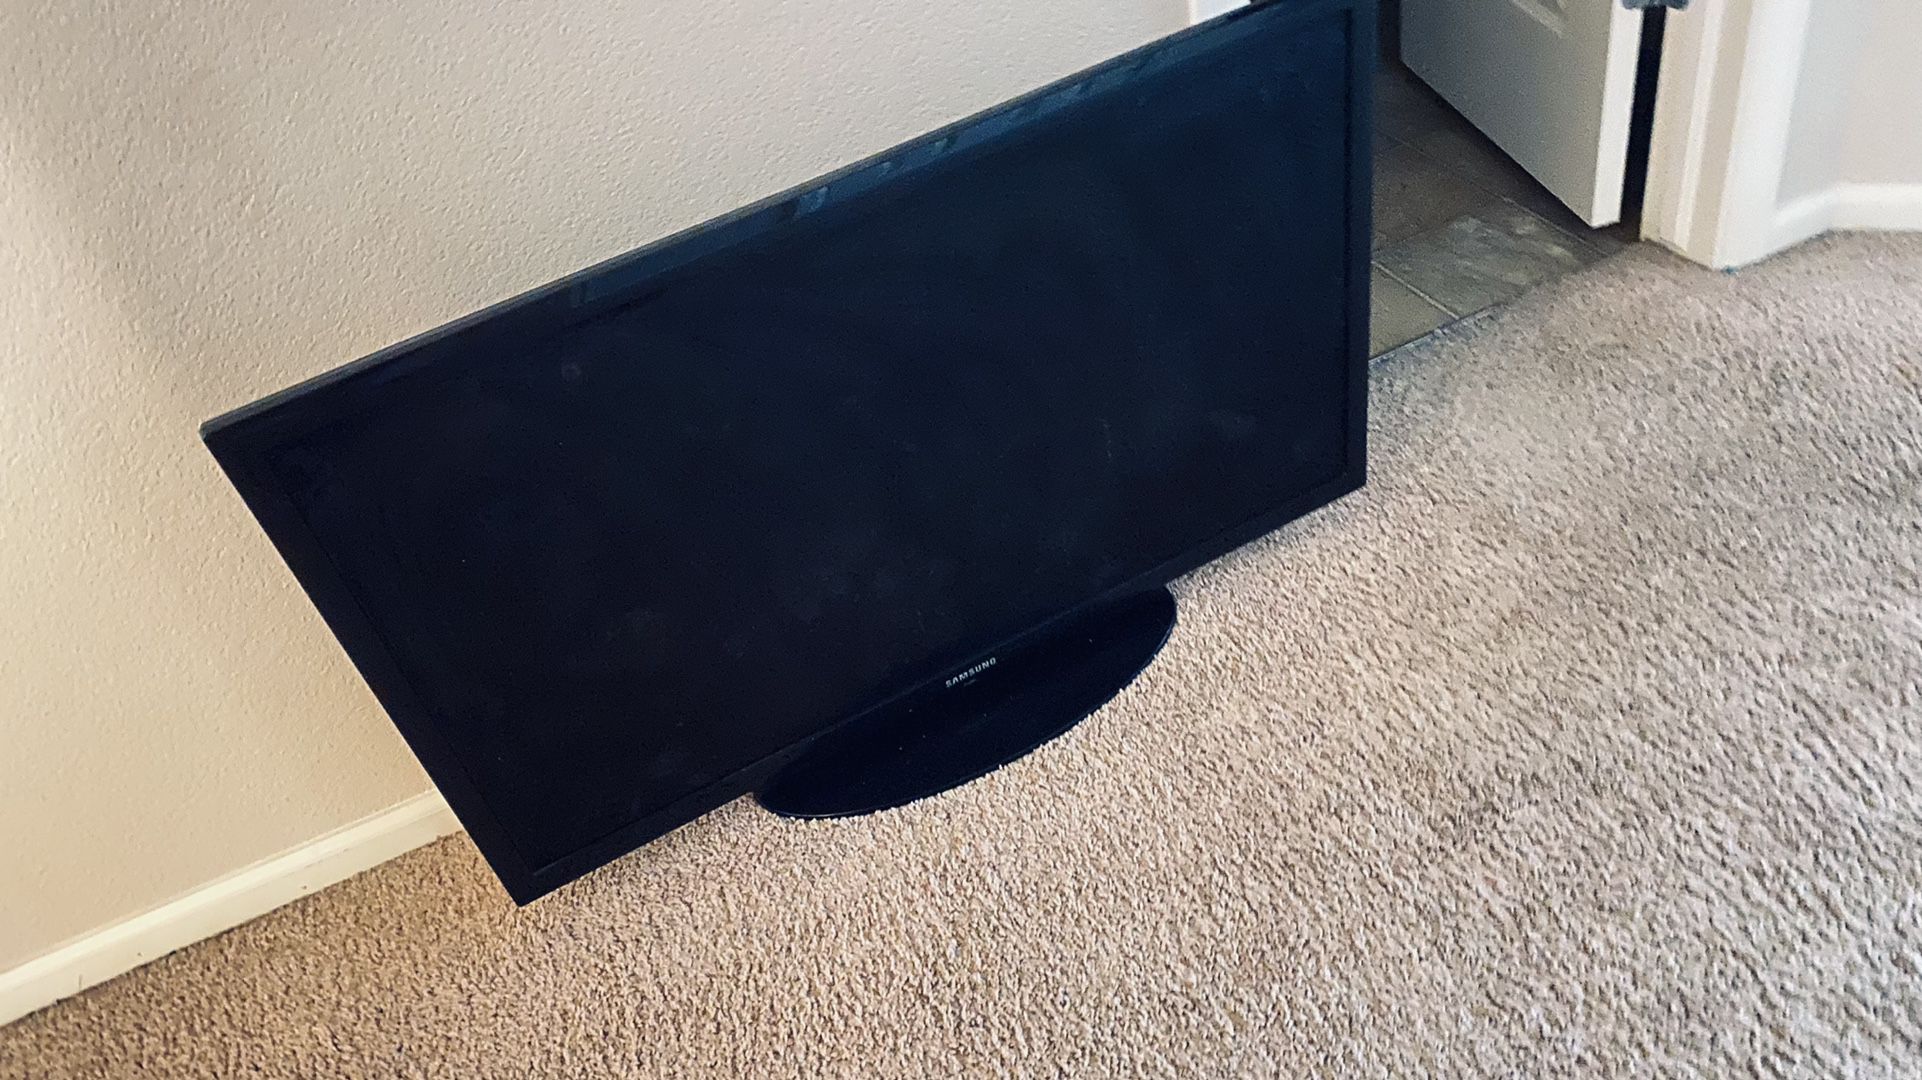 Samsung Tv For Parts 